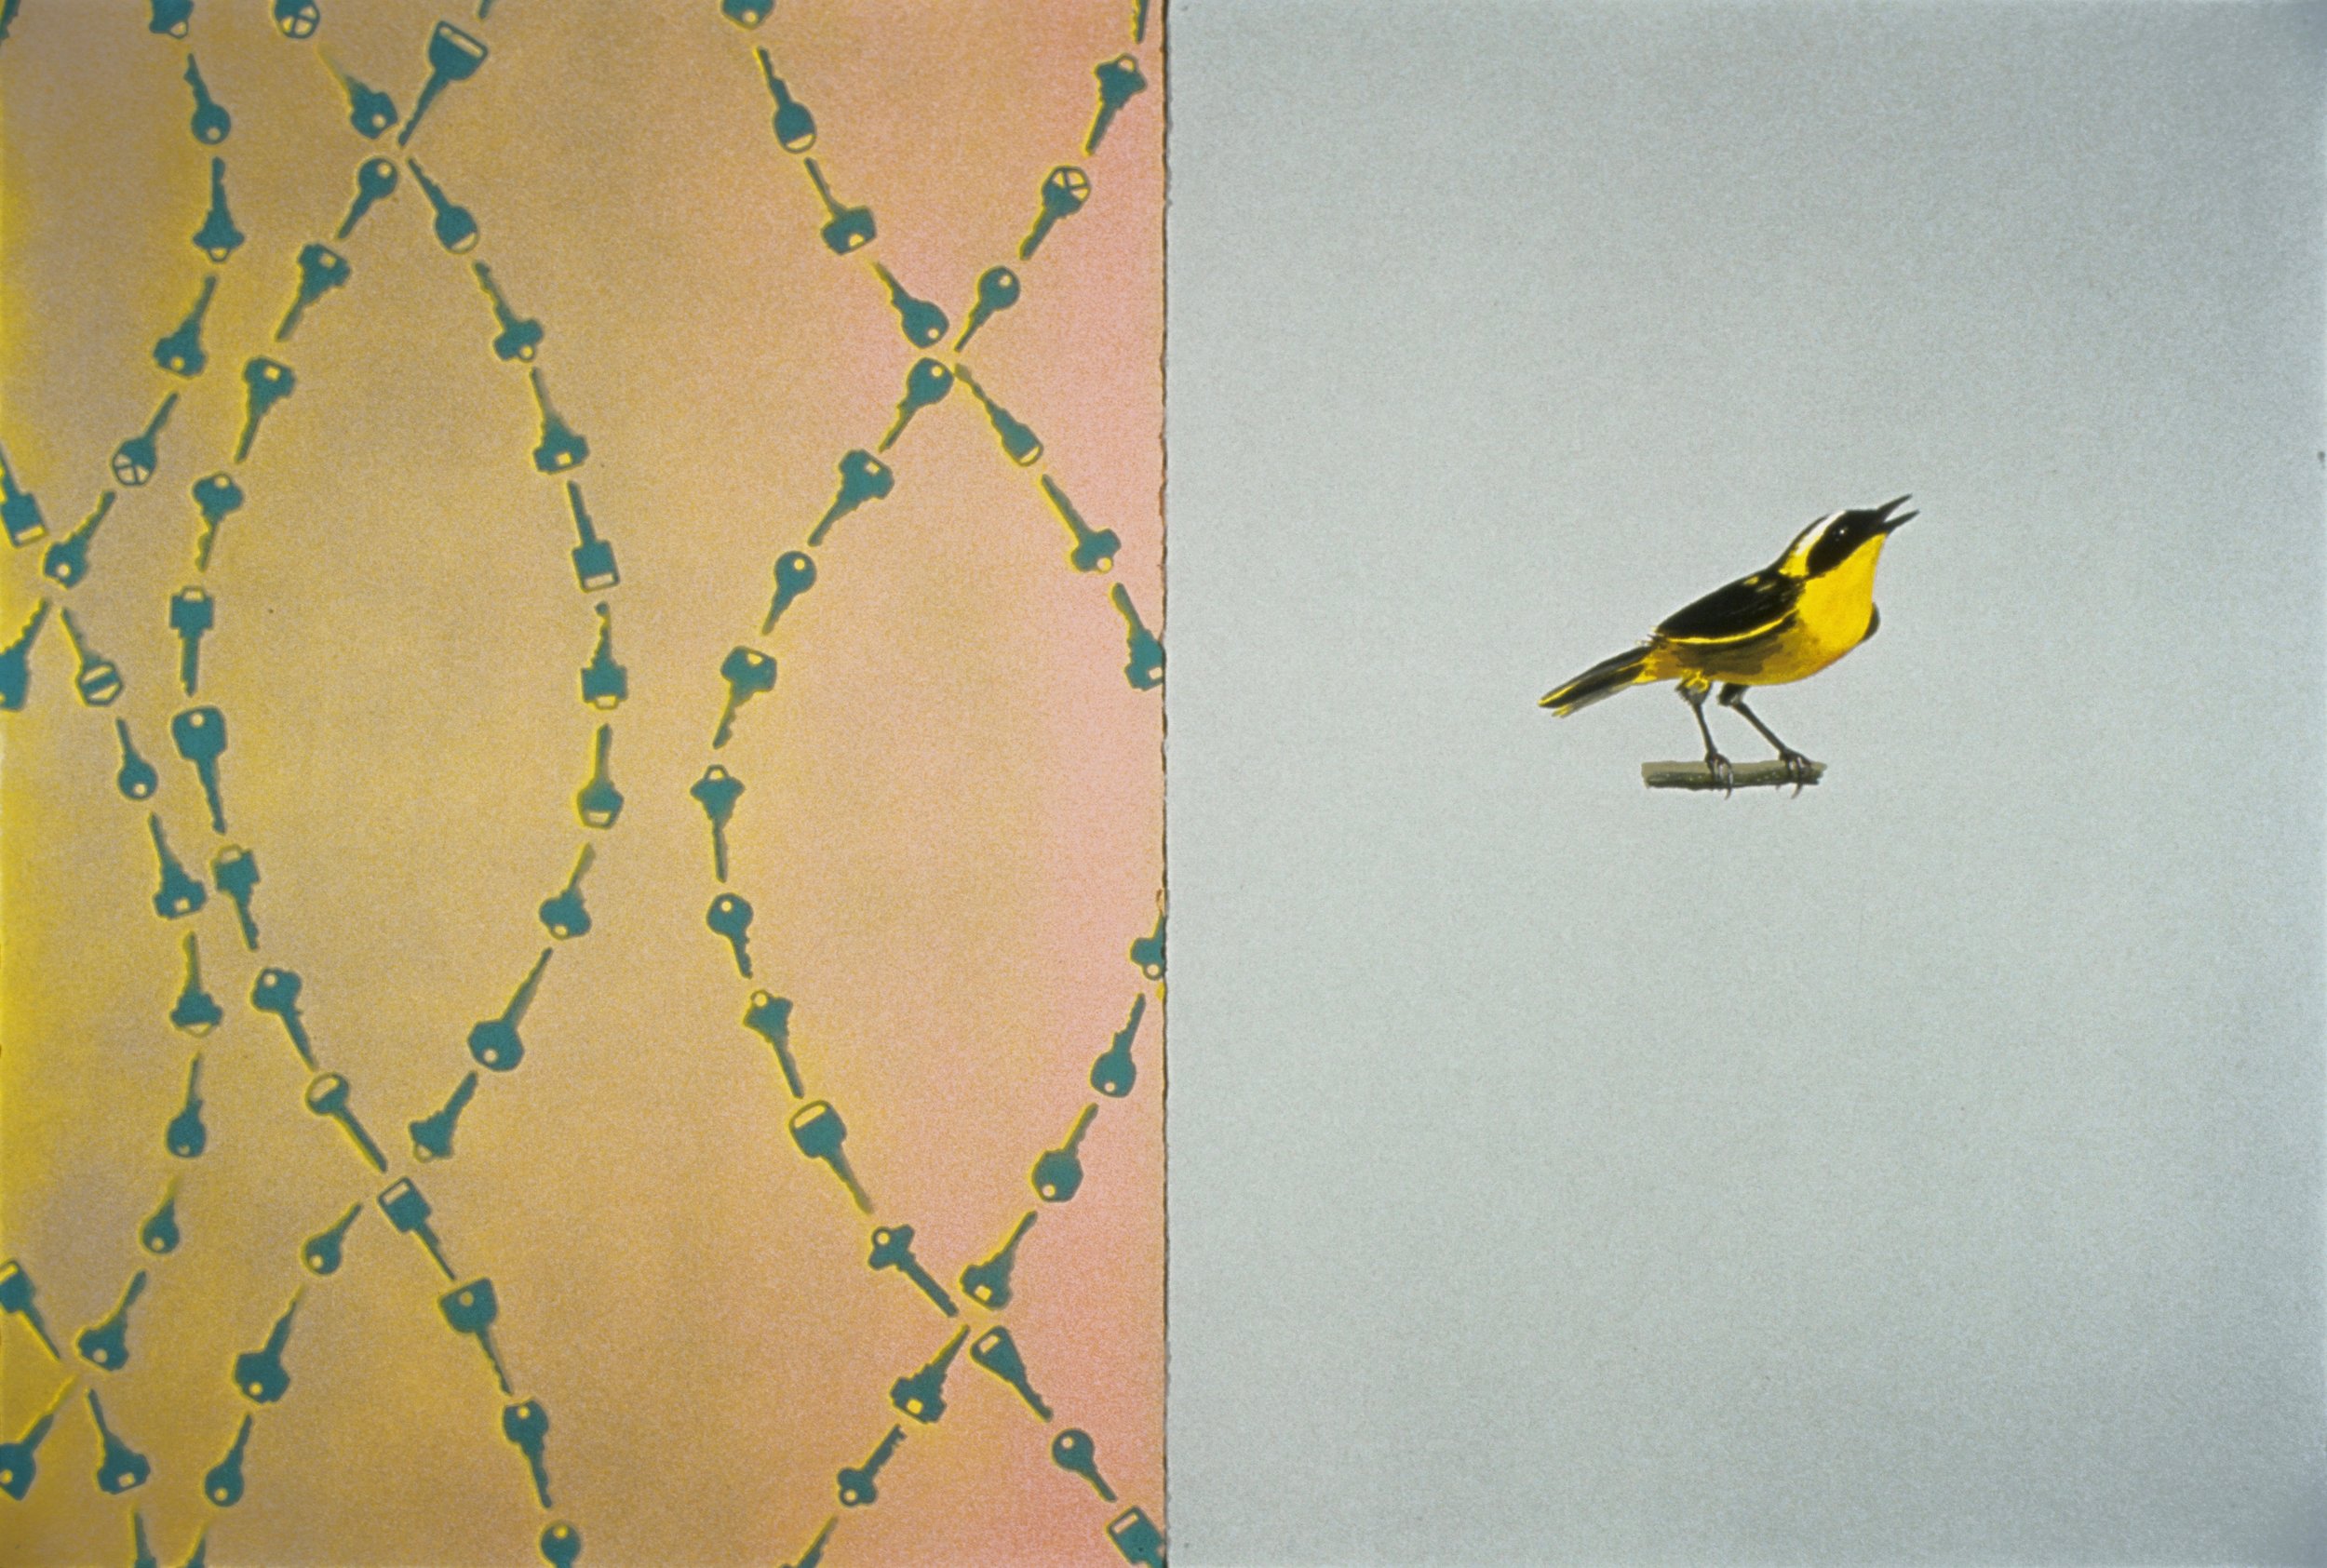 Untitled diptych, 2000